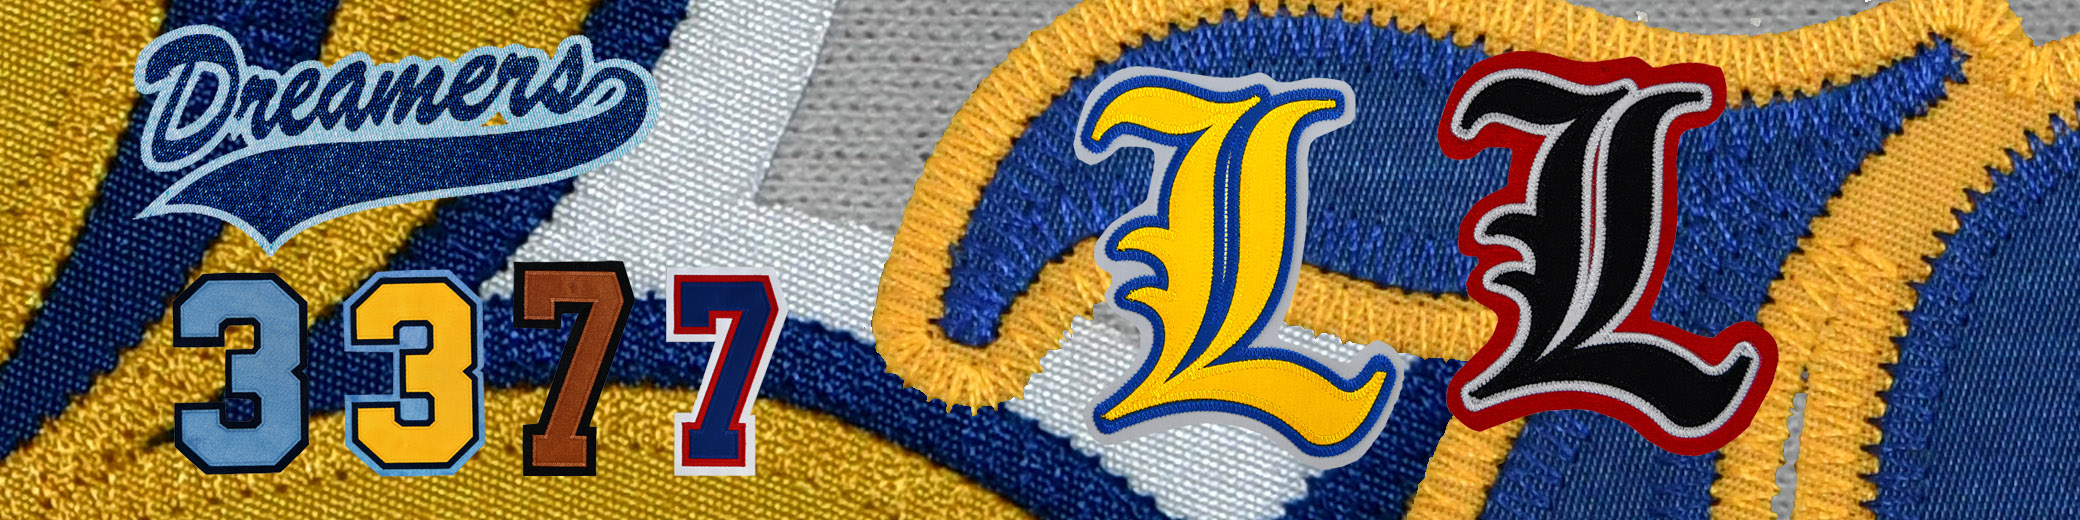 Tackle Twill examples of letters, numbers and custom graphics for use on uniforms.